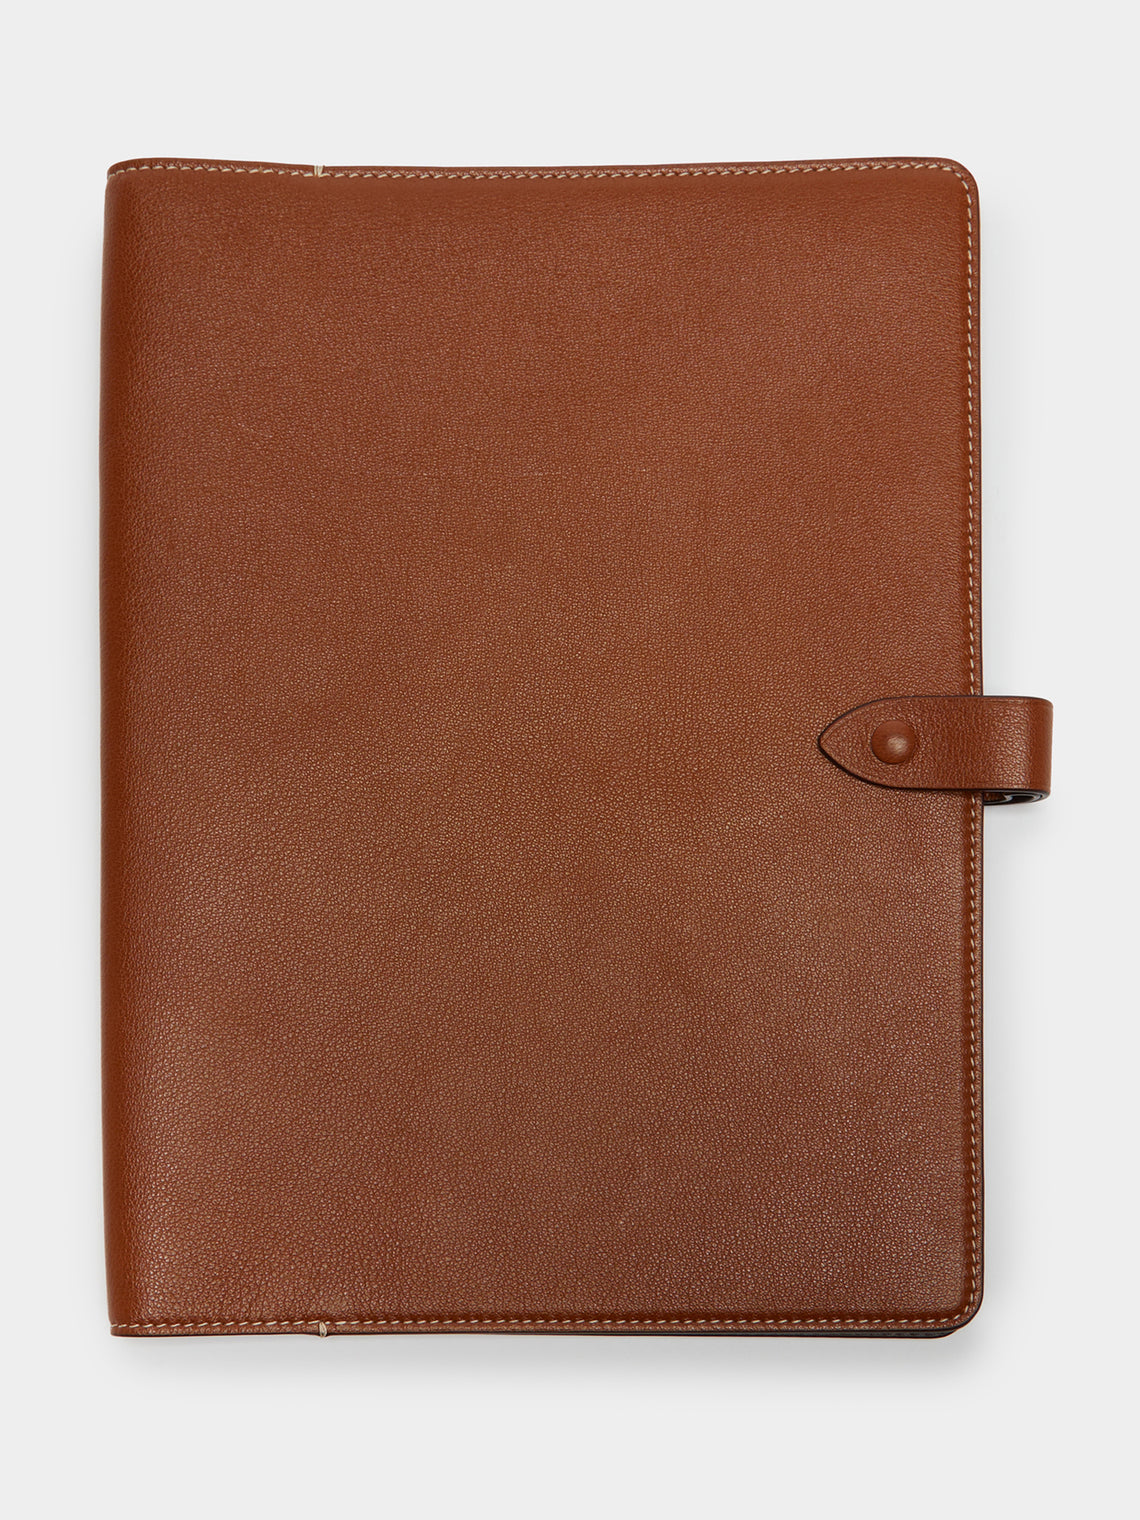 Métier - Leather Notebook Cover - Brown - ABASK - 